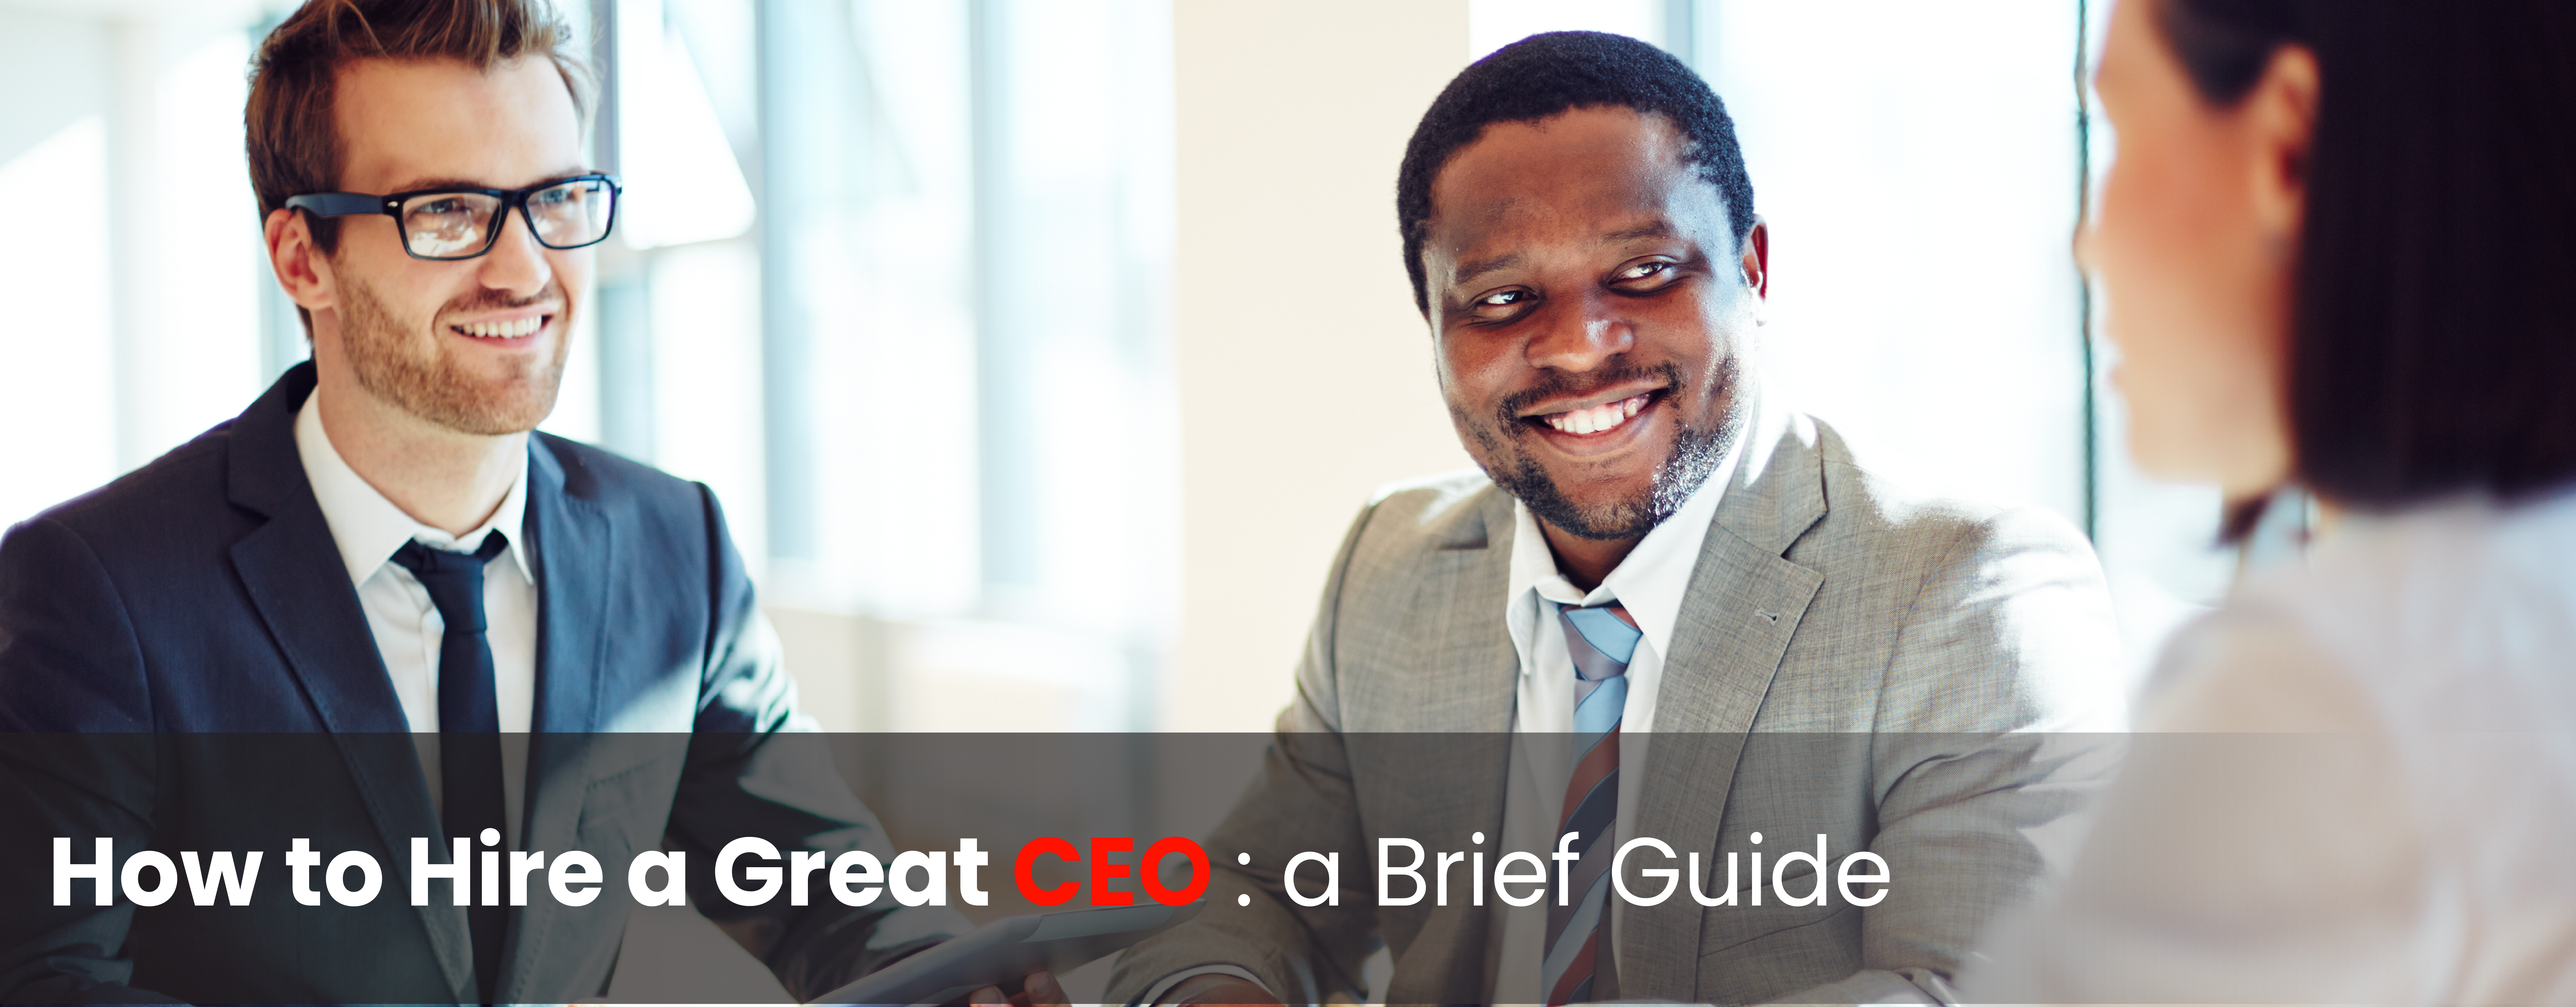 How to Hire a Great CEO: a Brief Guide